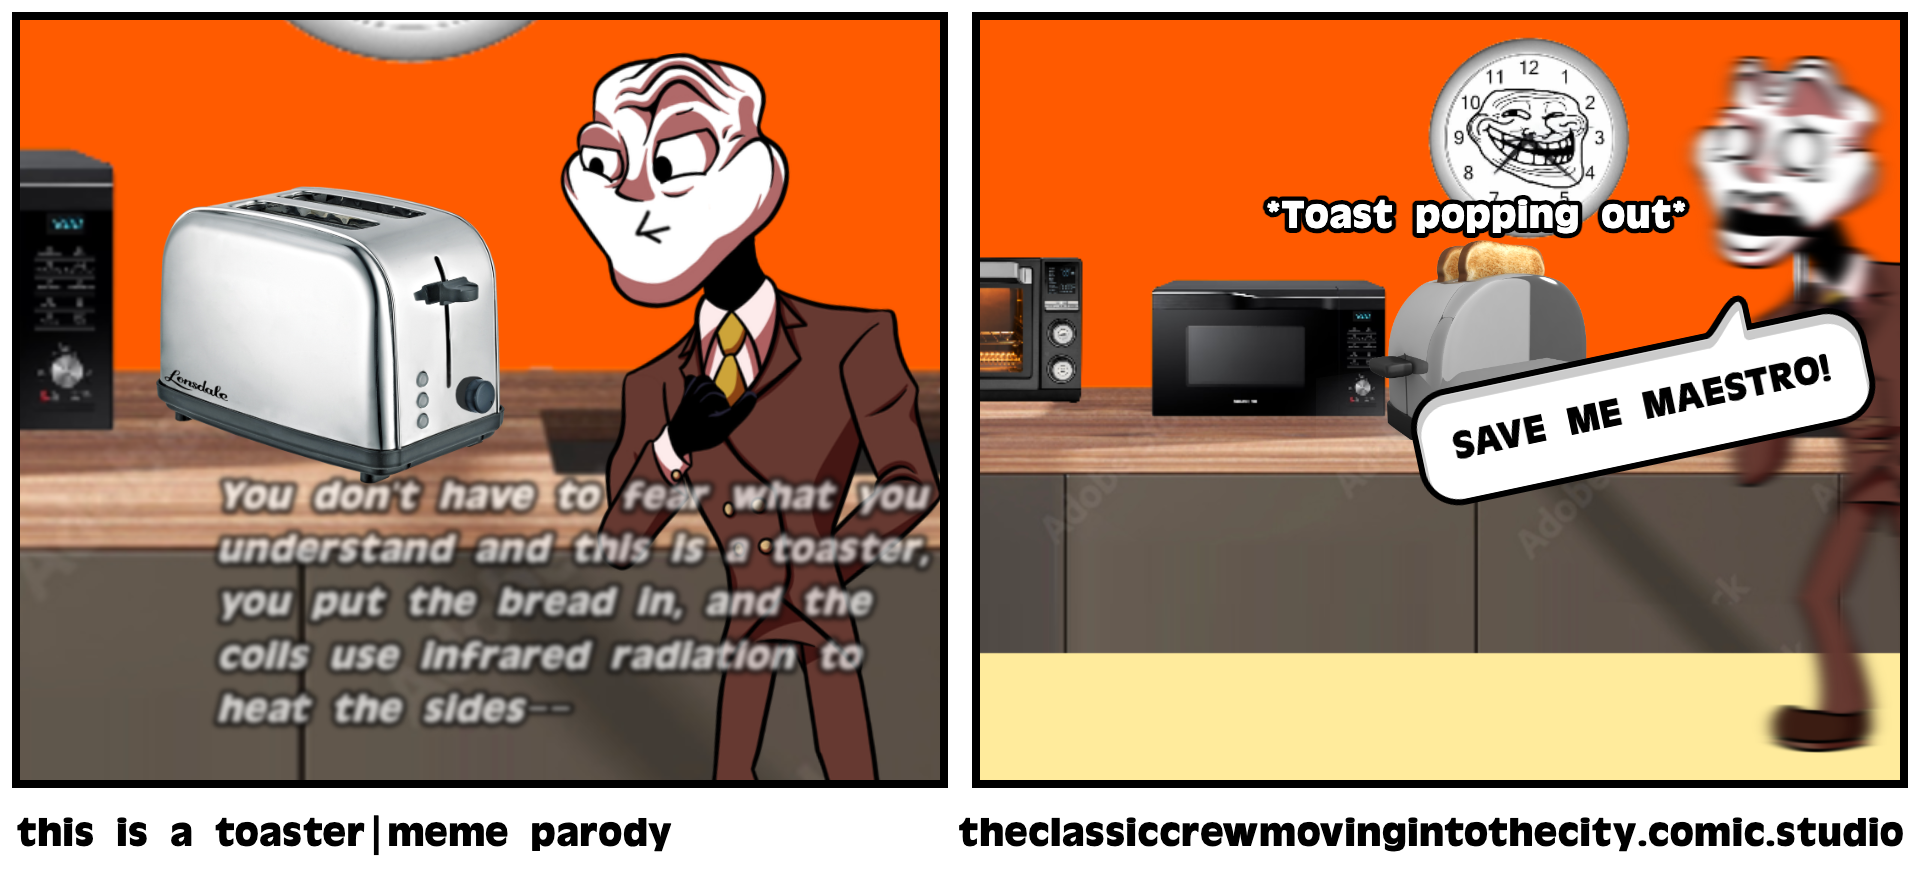 this is a toaster|meme parody